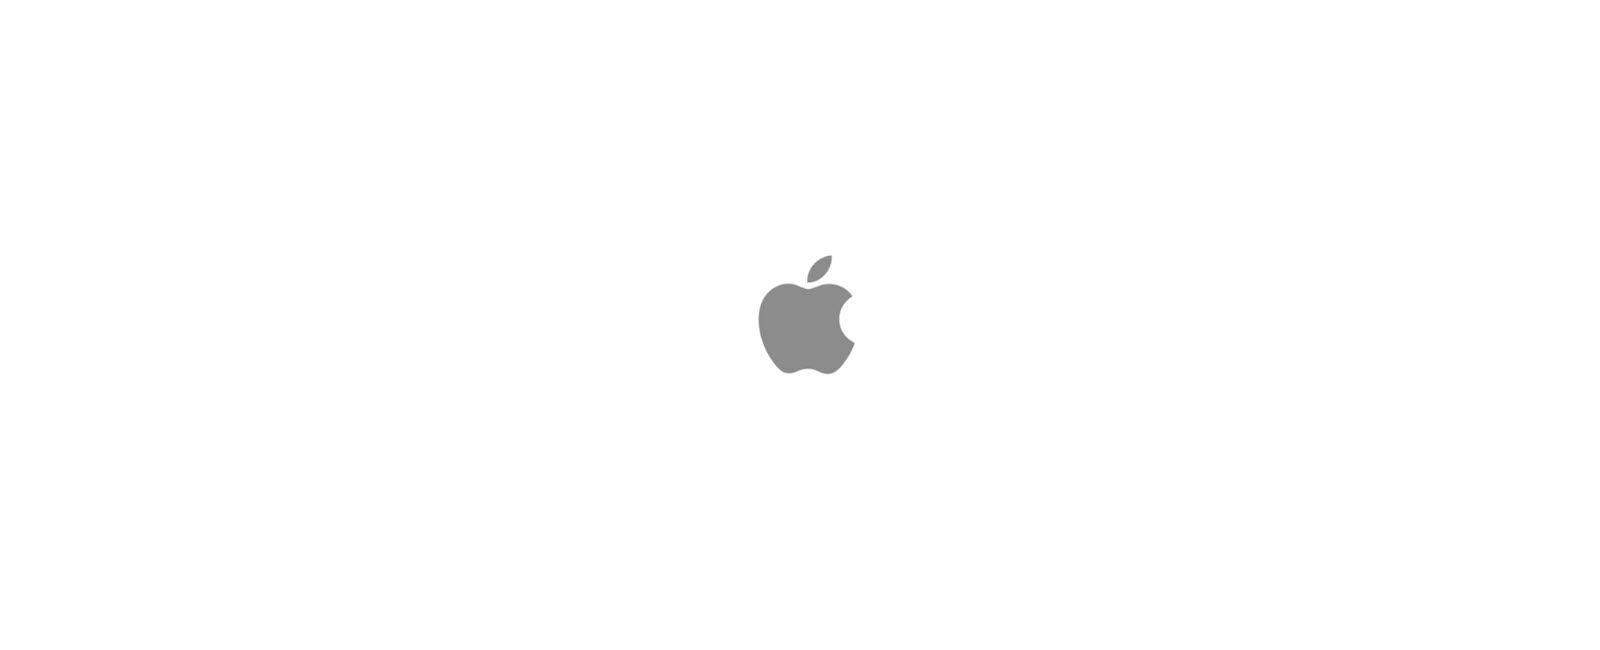 New 2016 Small Apple Logo - Why is No One Talking about Apple Search Ads?